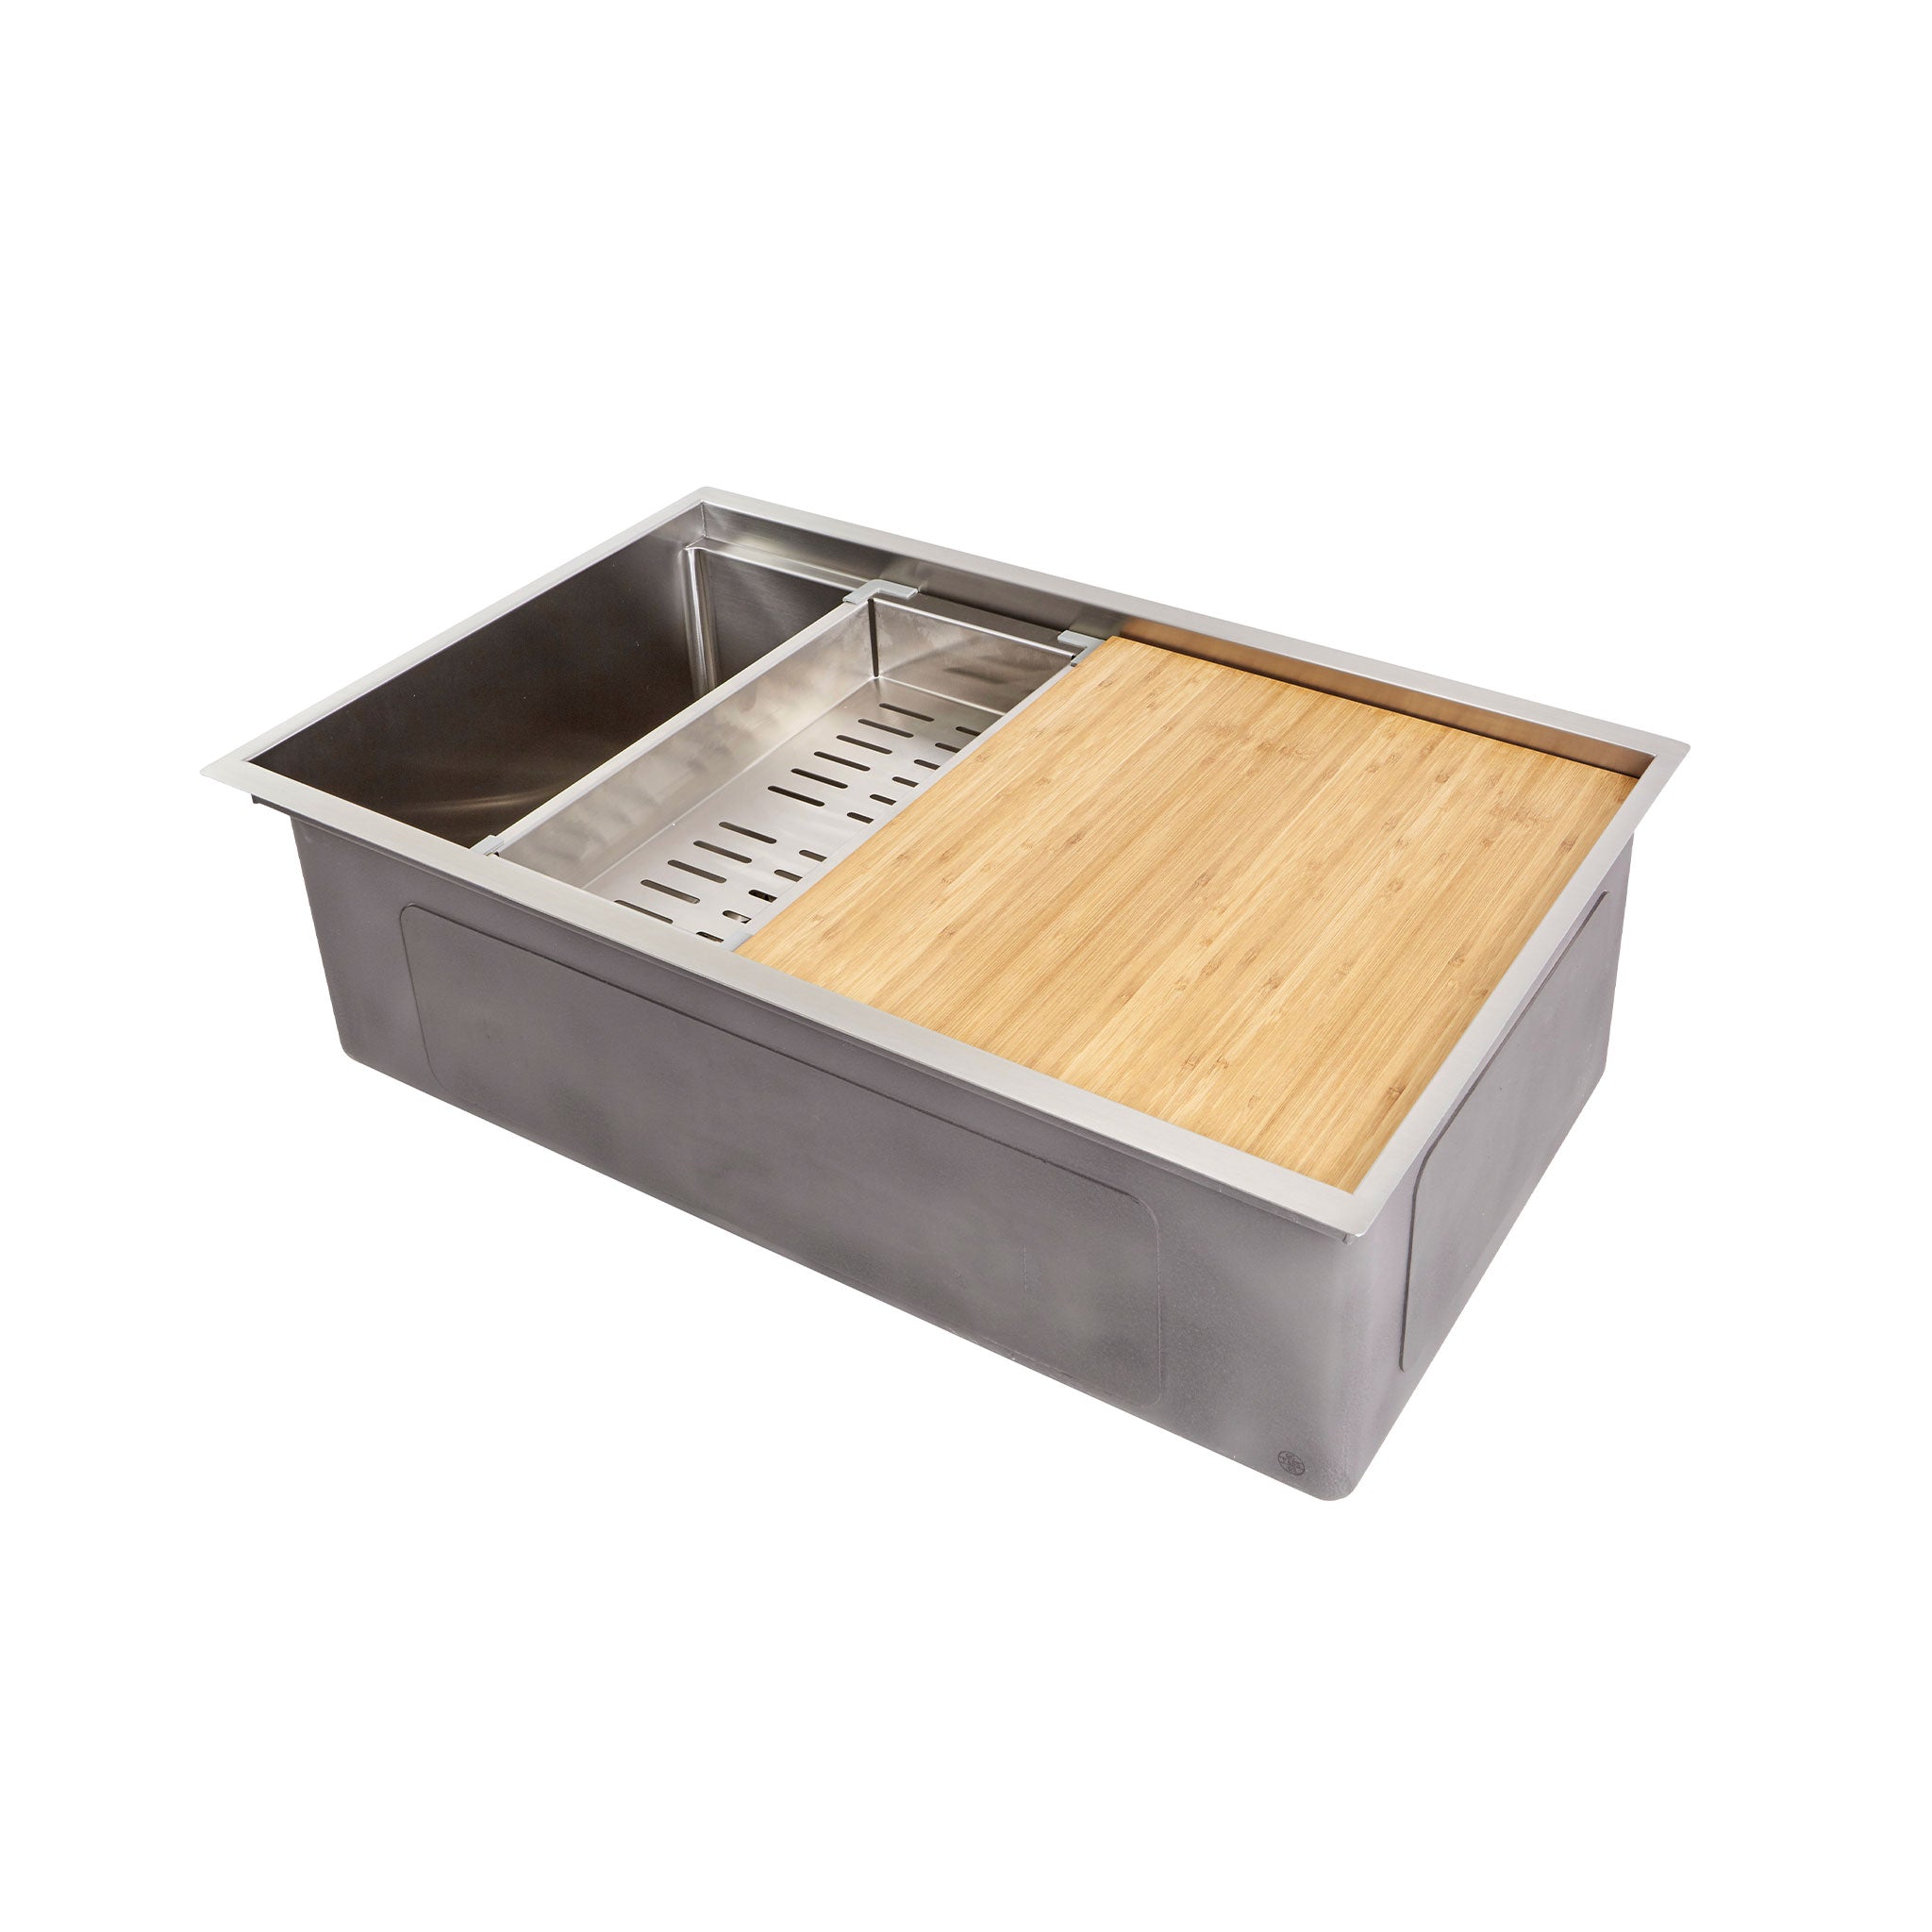 Bamboo cutting board and colander accessory for a Create Good workstation sink.